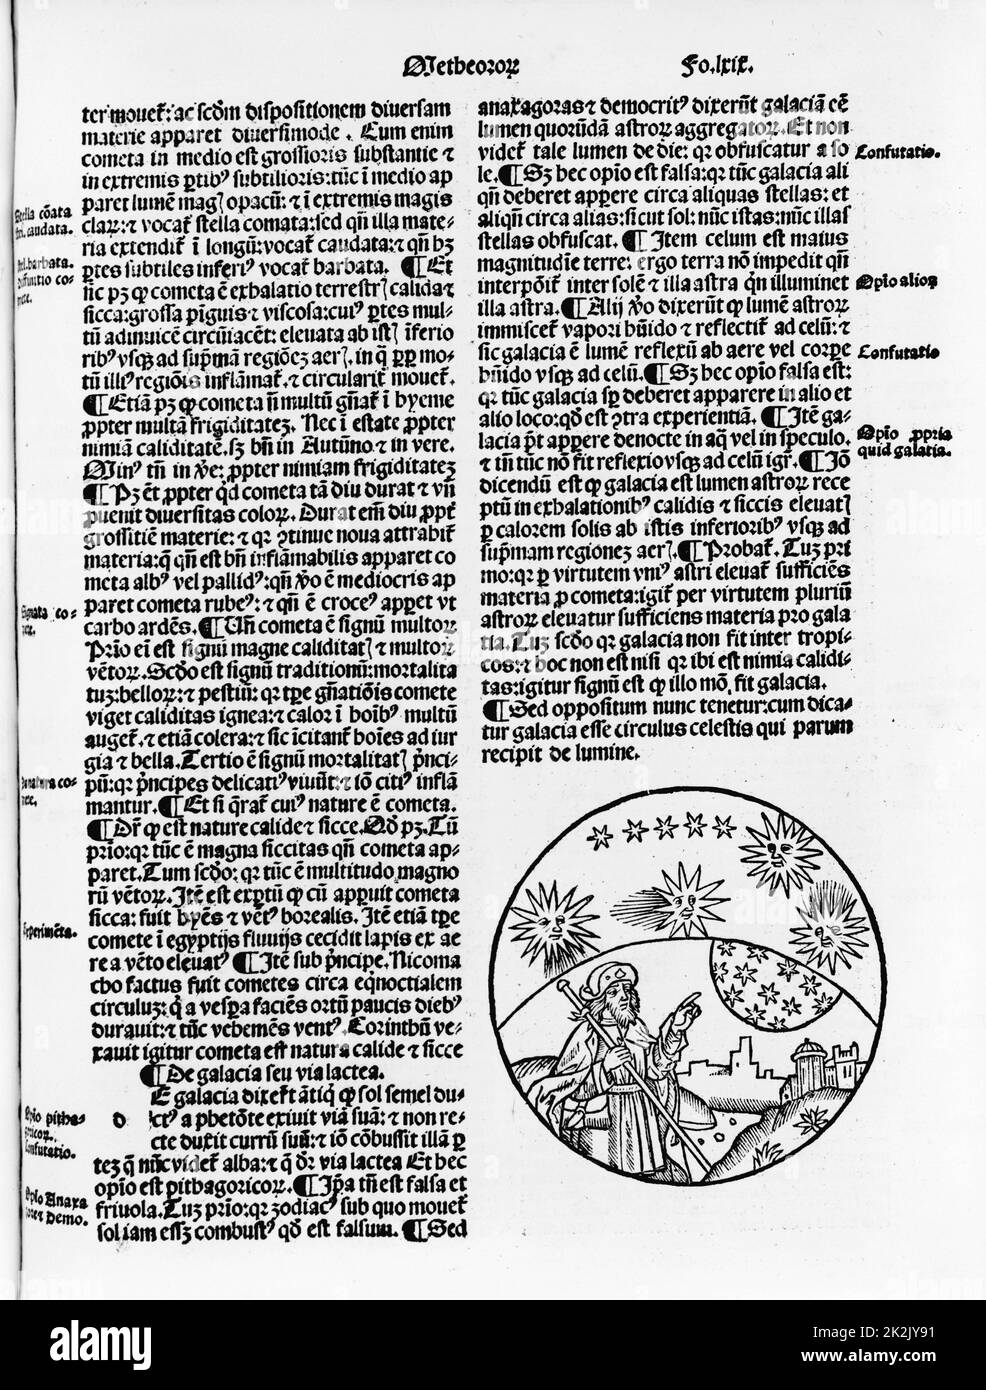 Illustrated page with vignette showing Aristotle? pointing to the stars in the sky. woodcut by Thomas Bricot, 1496] Illustration in Textus abbreuiatus Aristotelis super octo libris Phisicorum & tota naturali philosophia, nuper a Magistro Thoma Bricot at Lyons, France. Stock Photo